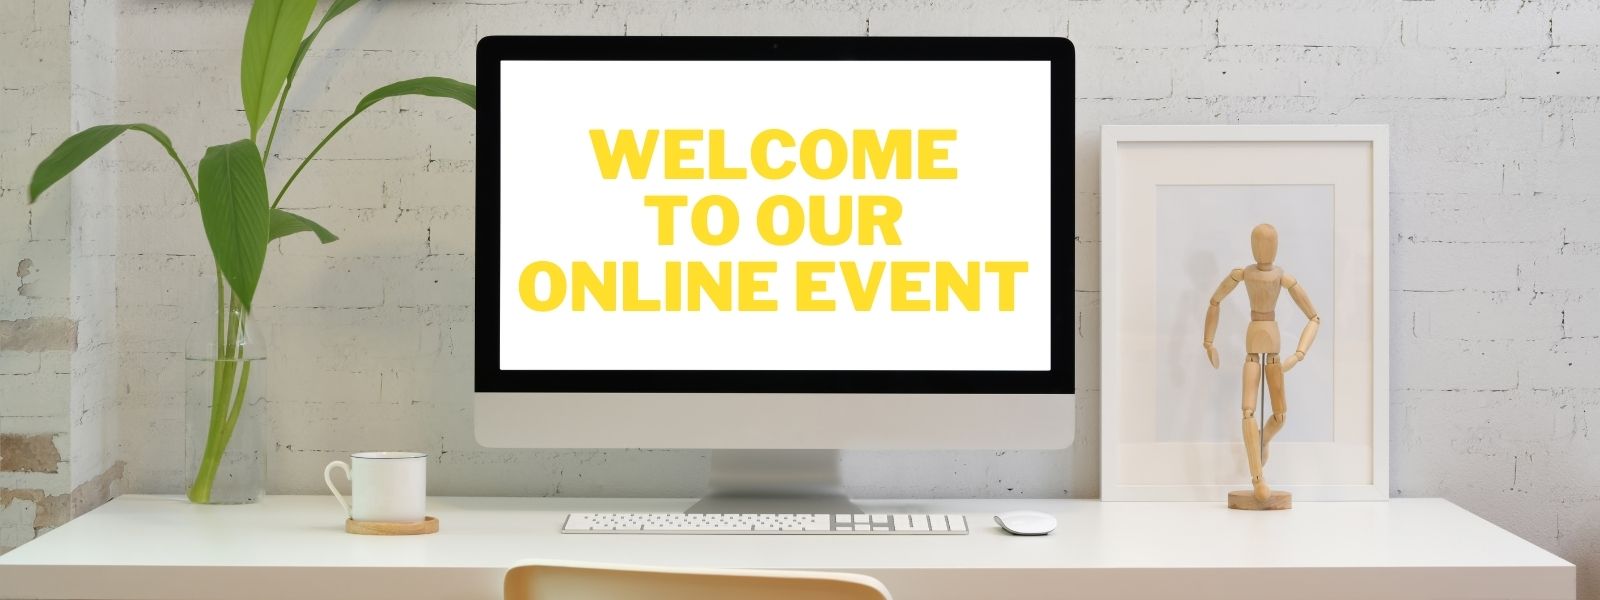 A welcome sign for an online event on a computer screen.